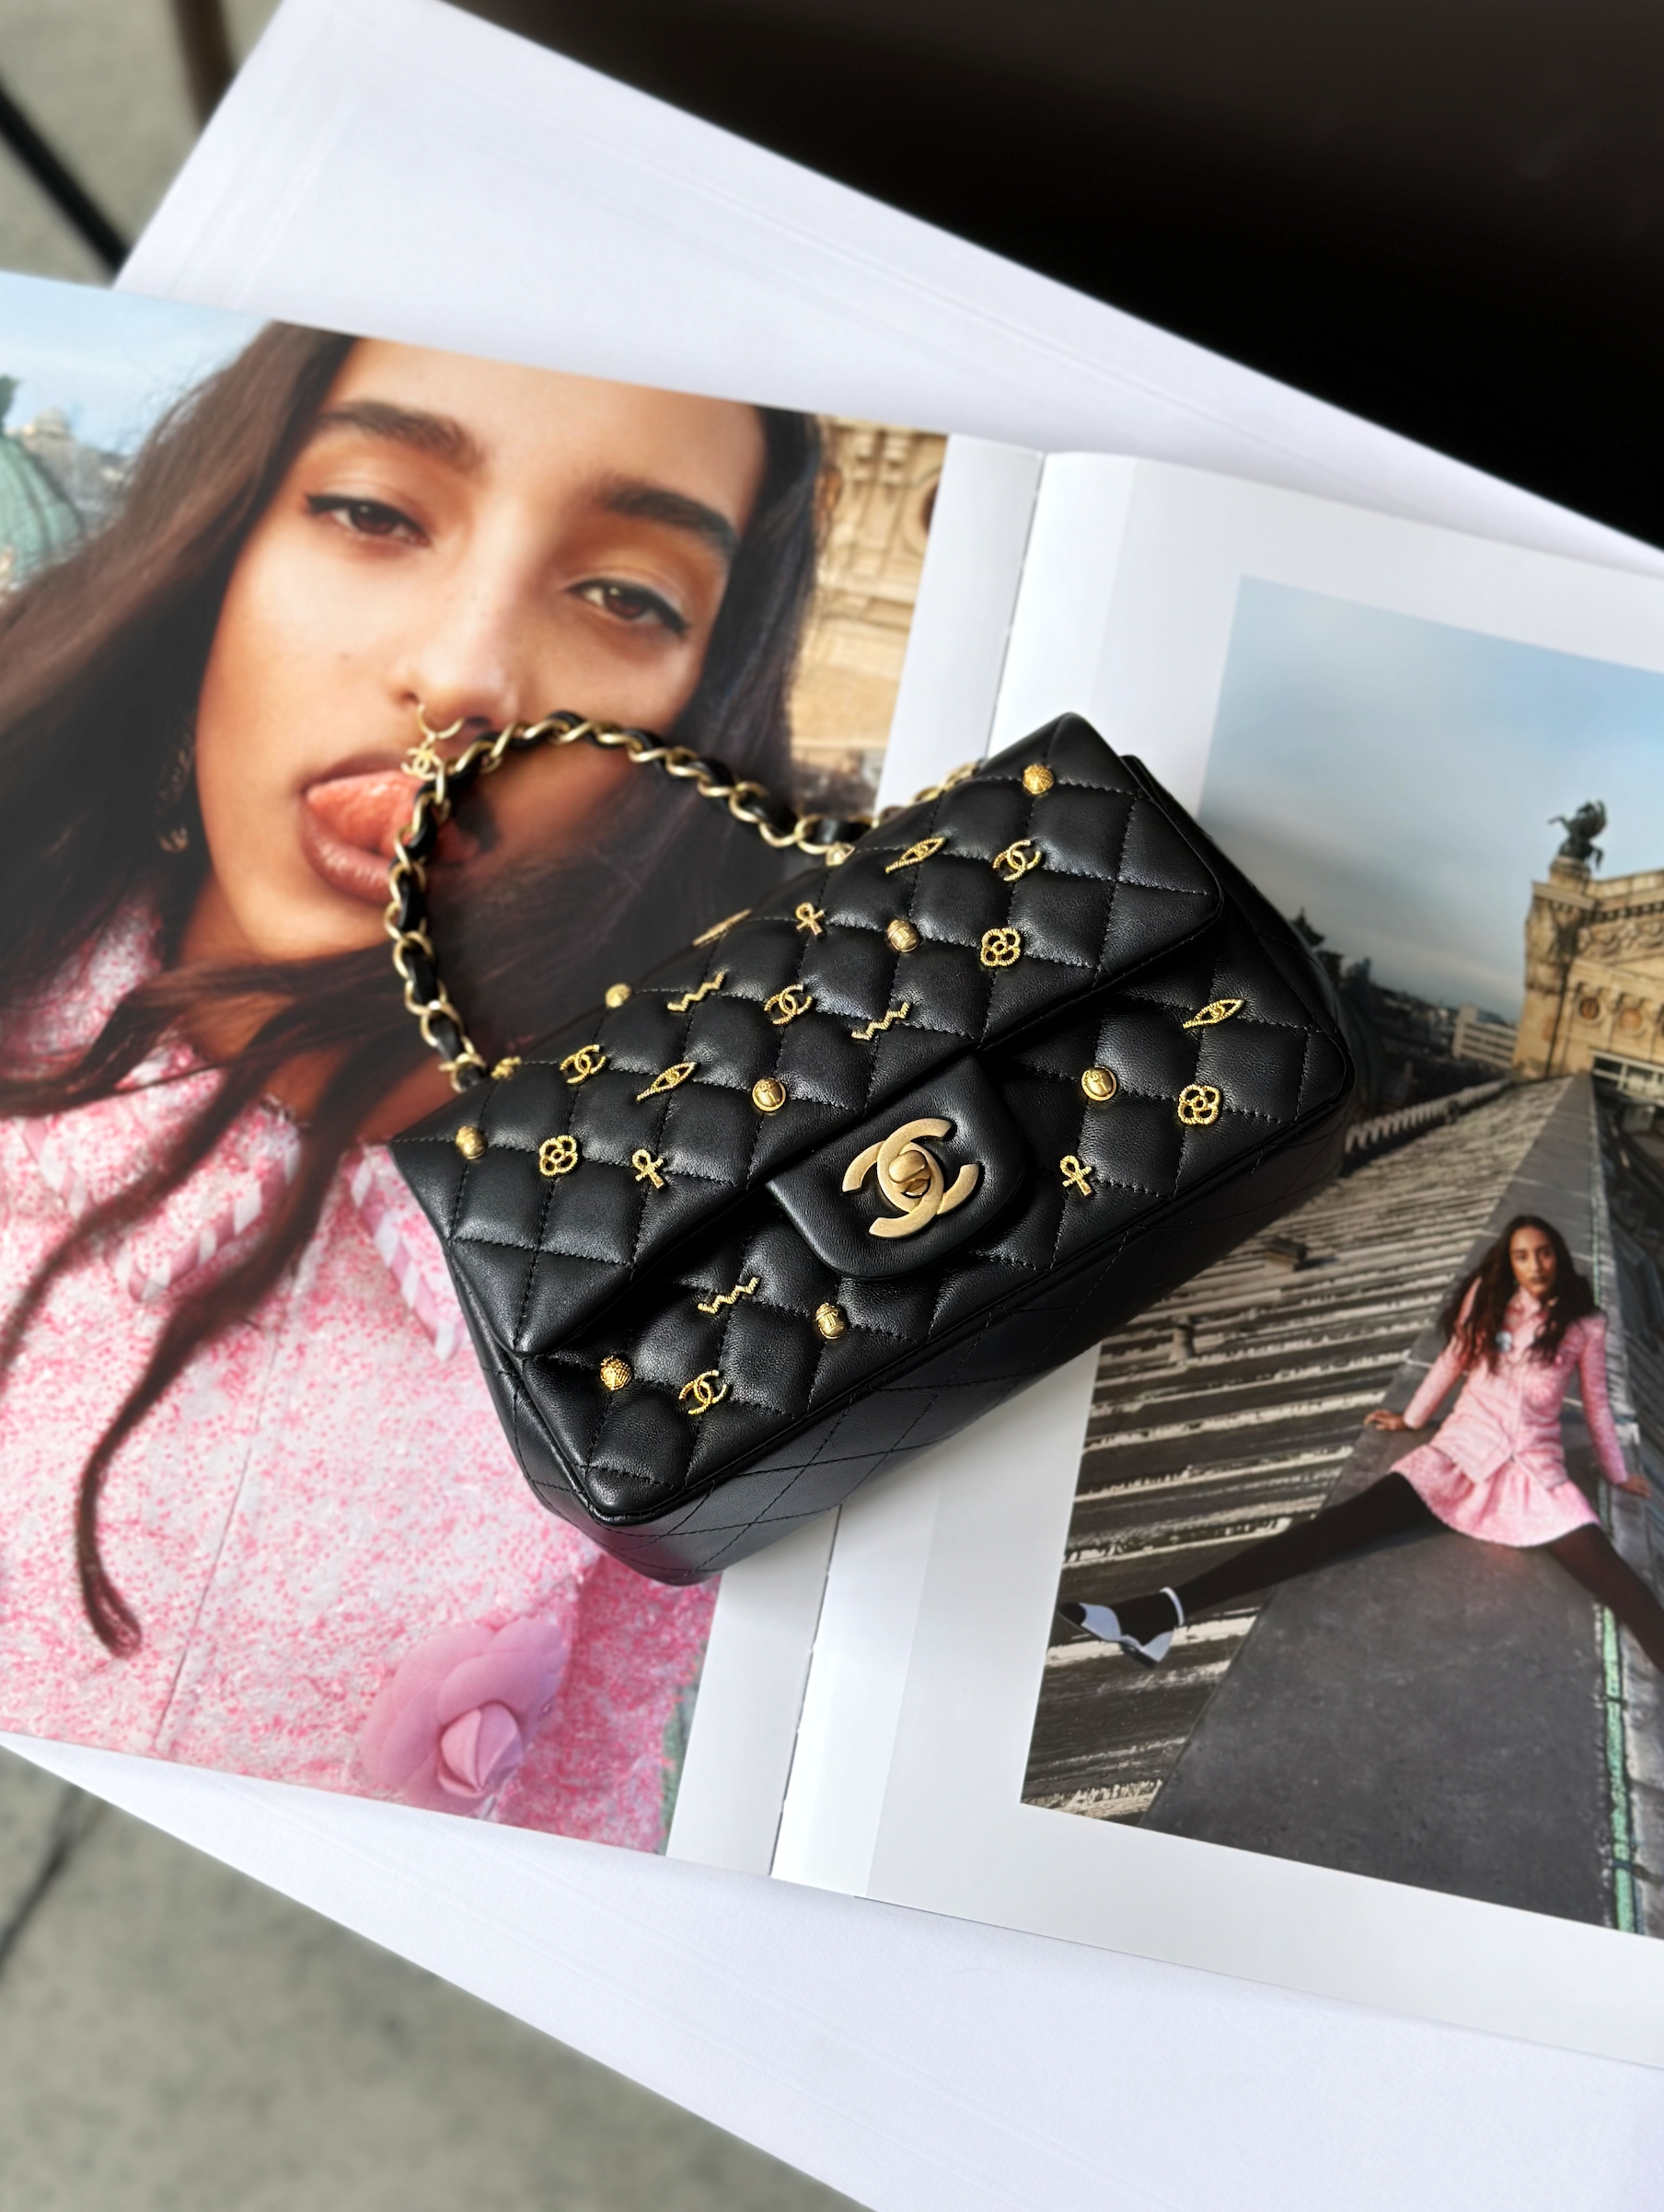 THE ULTIMATE GUIDE TO BUYING CHANEL ONLINE: HOW TO FIND AUTHENTIC